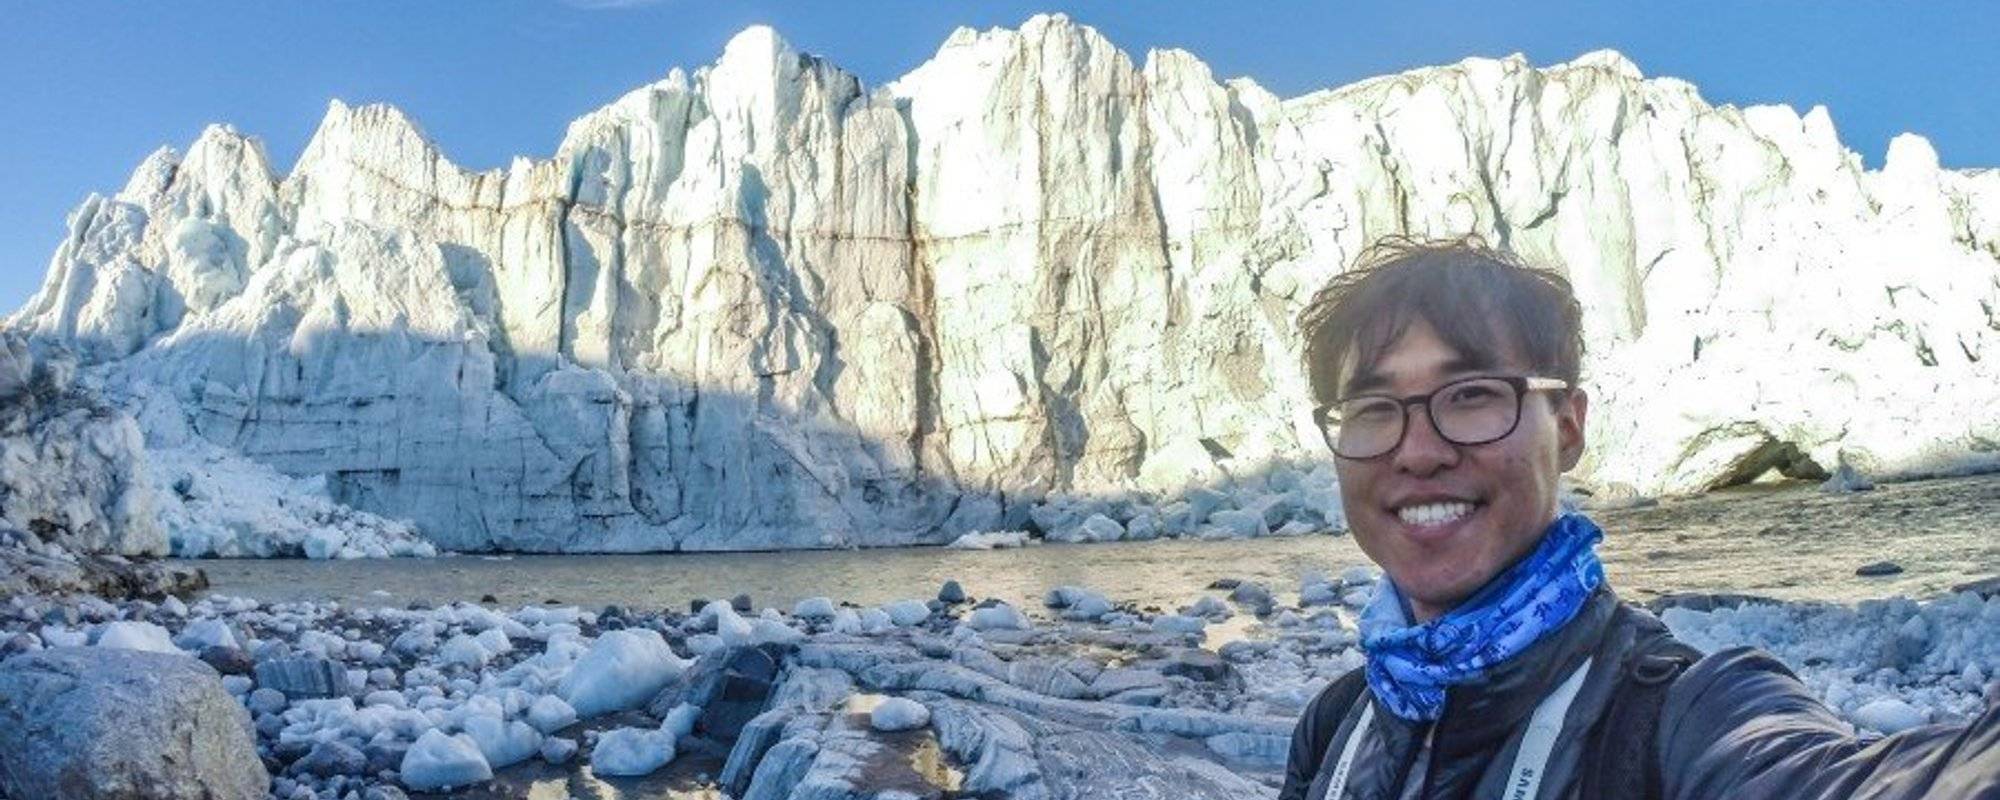 [Greenland, Kangerlussuaq #1] I got the chance to travel glacier and bed in a coincidence!
